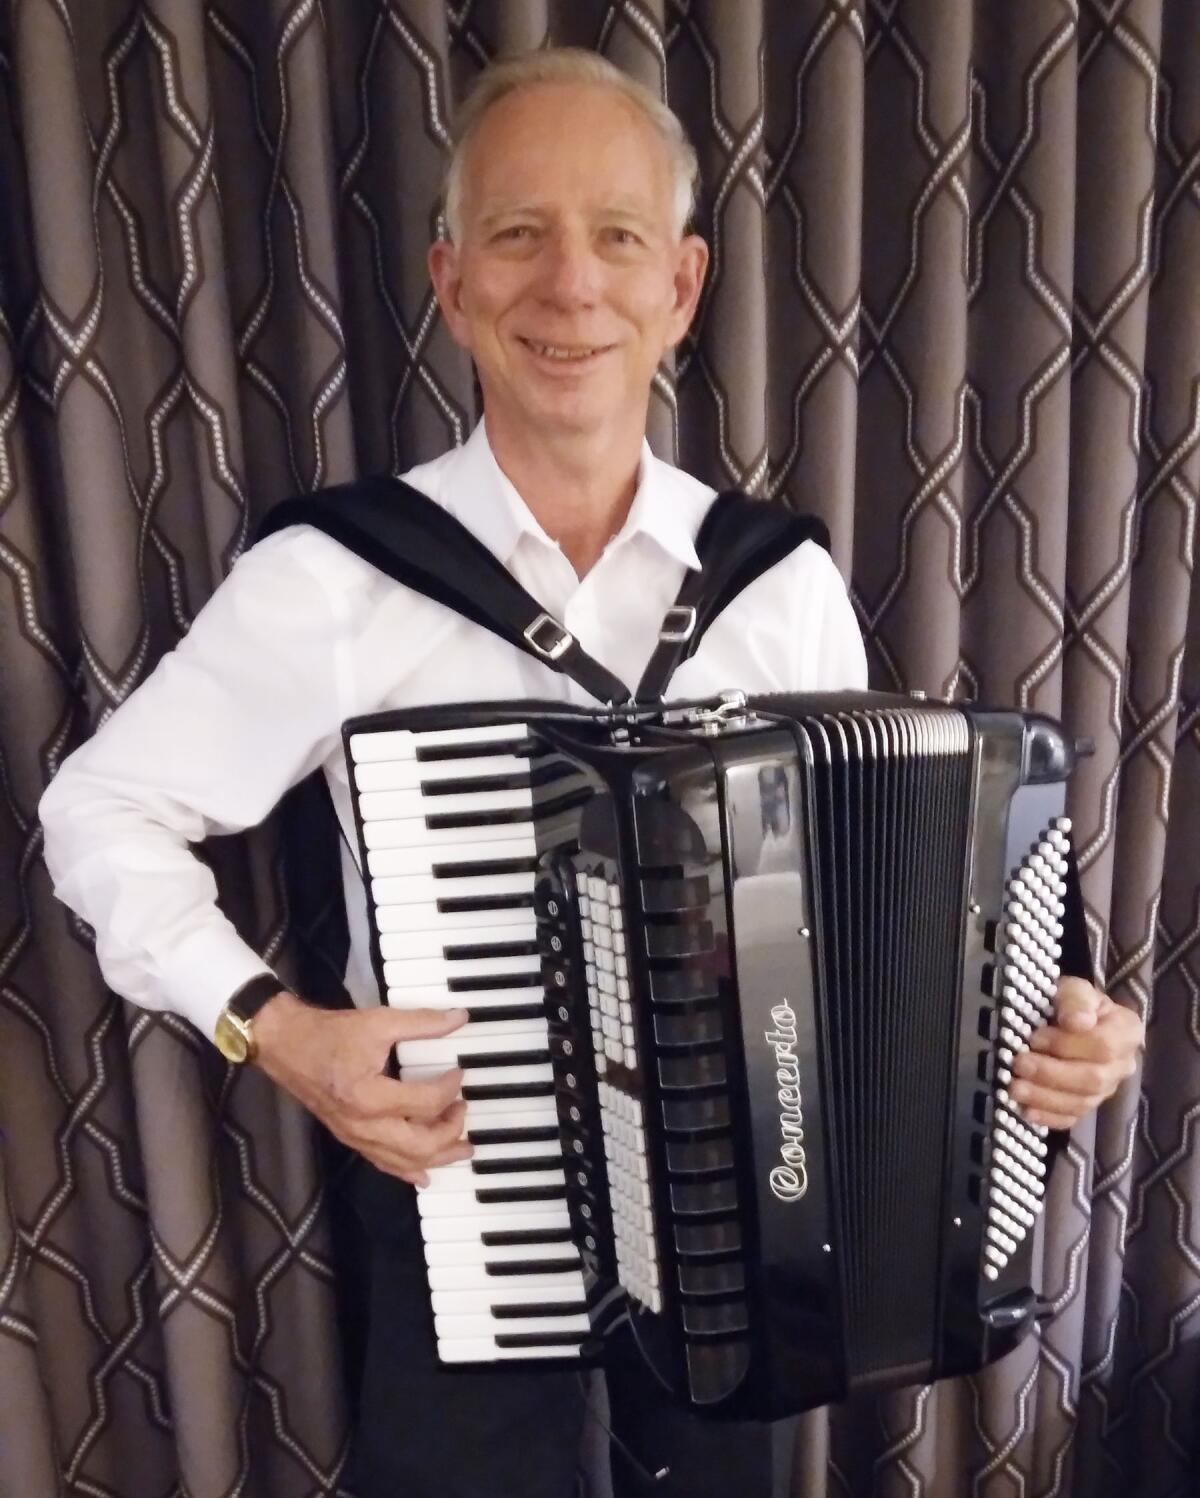 Accordionist Gordon Kohl will open the Rancho Bernardo Library’s 2023-24 Discovery Concert Series at 3 p.m. Sept. 9.